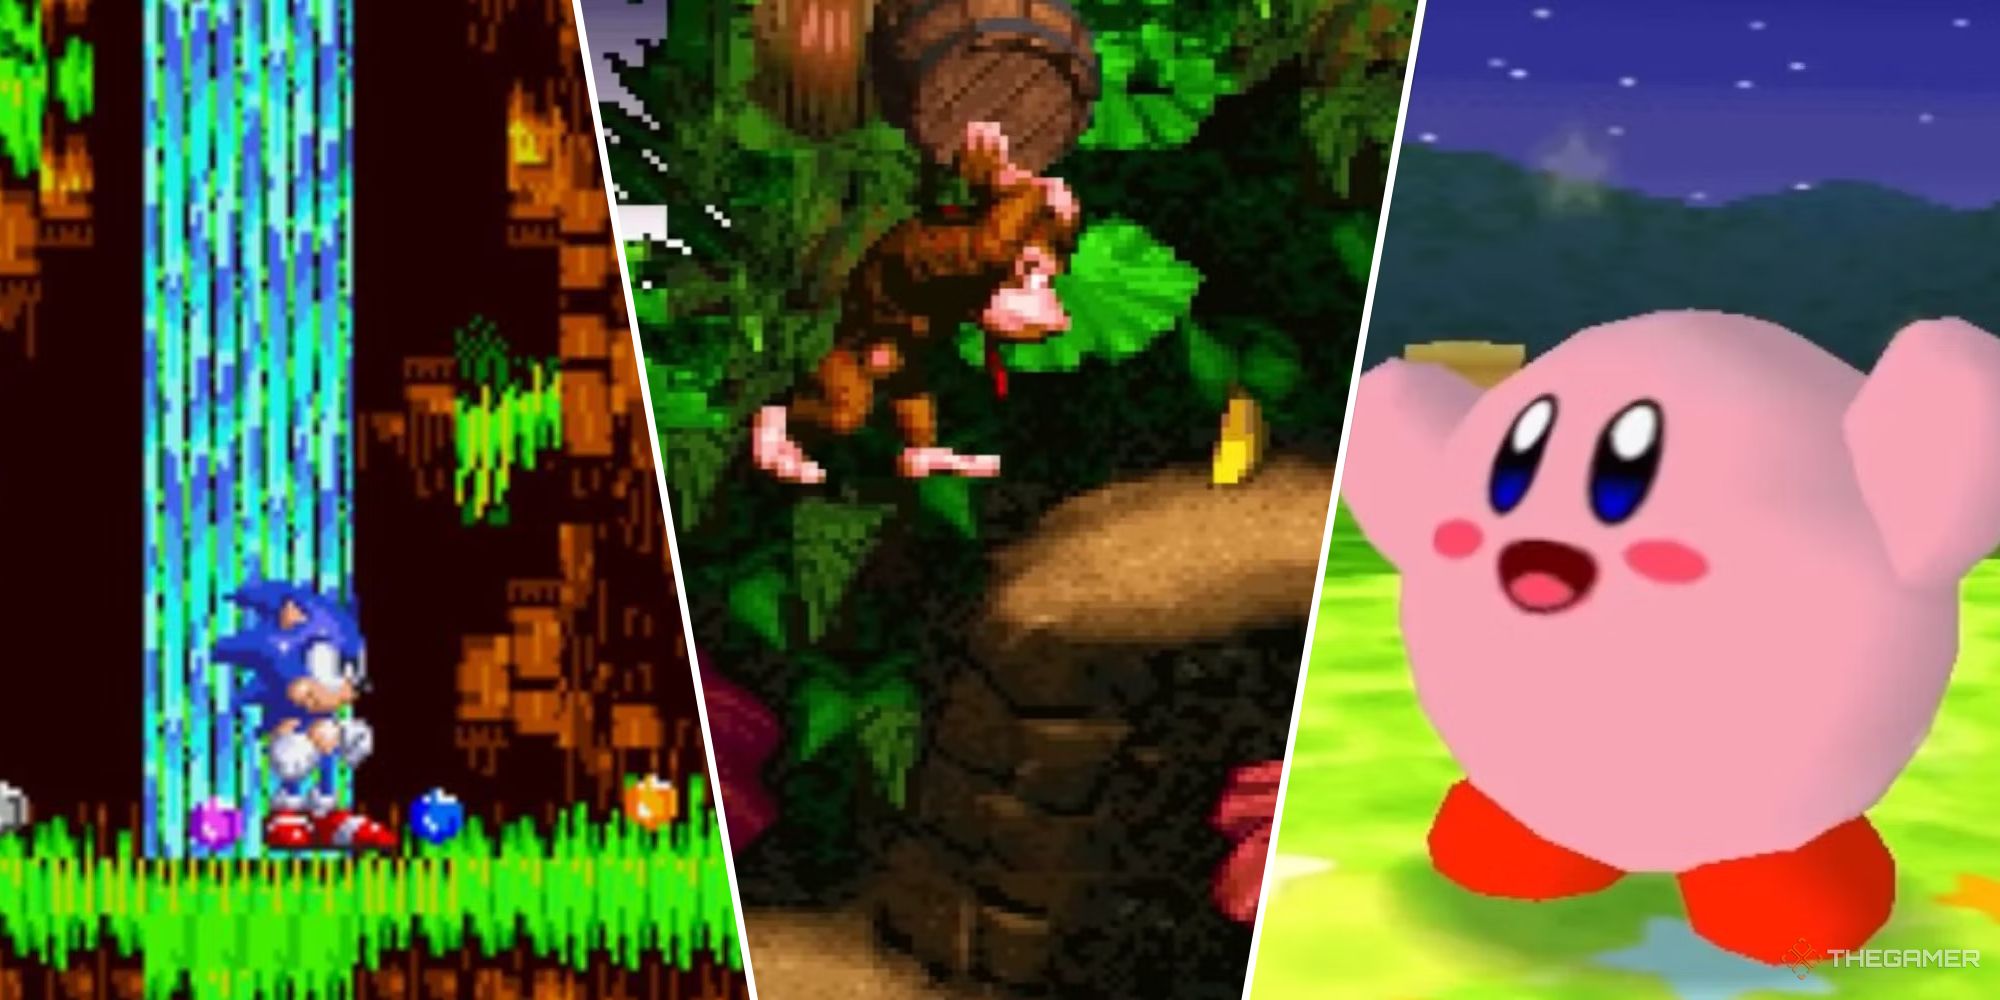 Classic Retro Platformers - Sonic, Donkey Kong, and Kirby